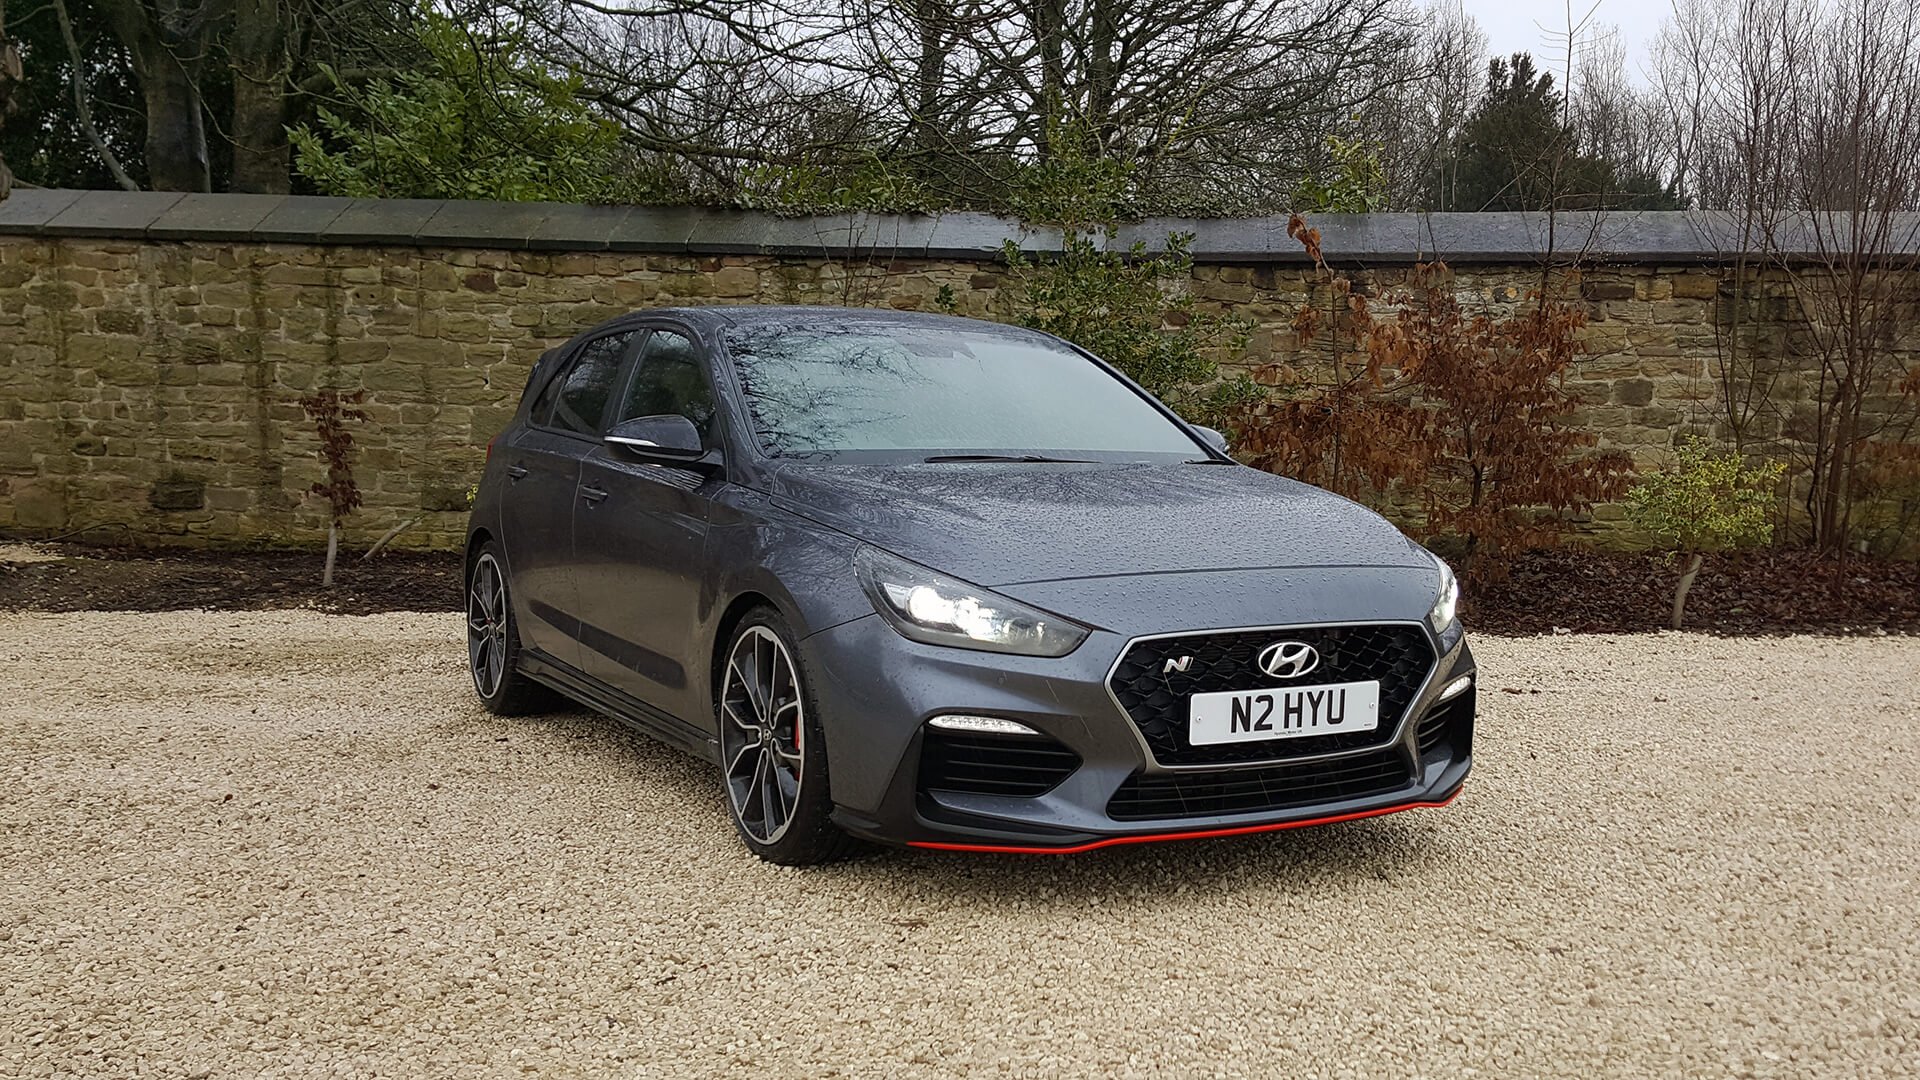 Hyundai i30N Performance - RSR Bookings - The Experience of a Lifetime